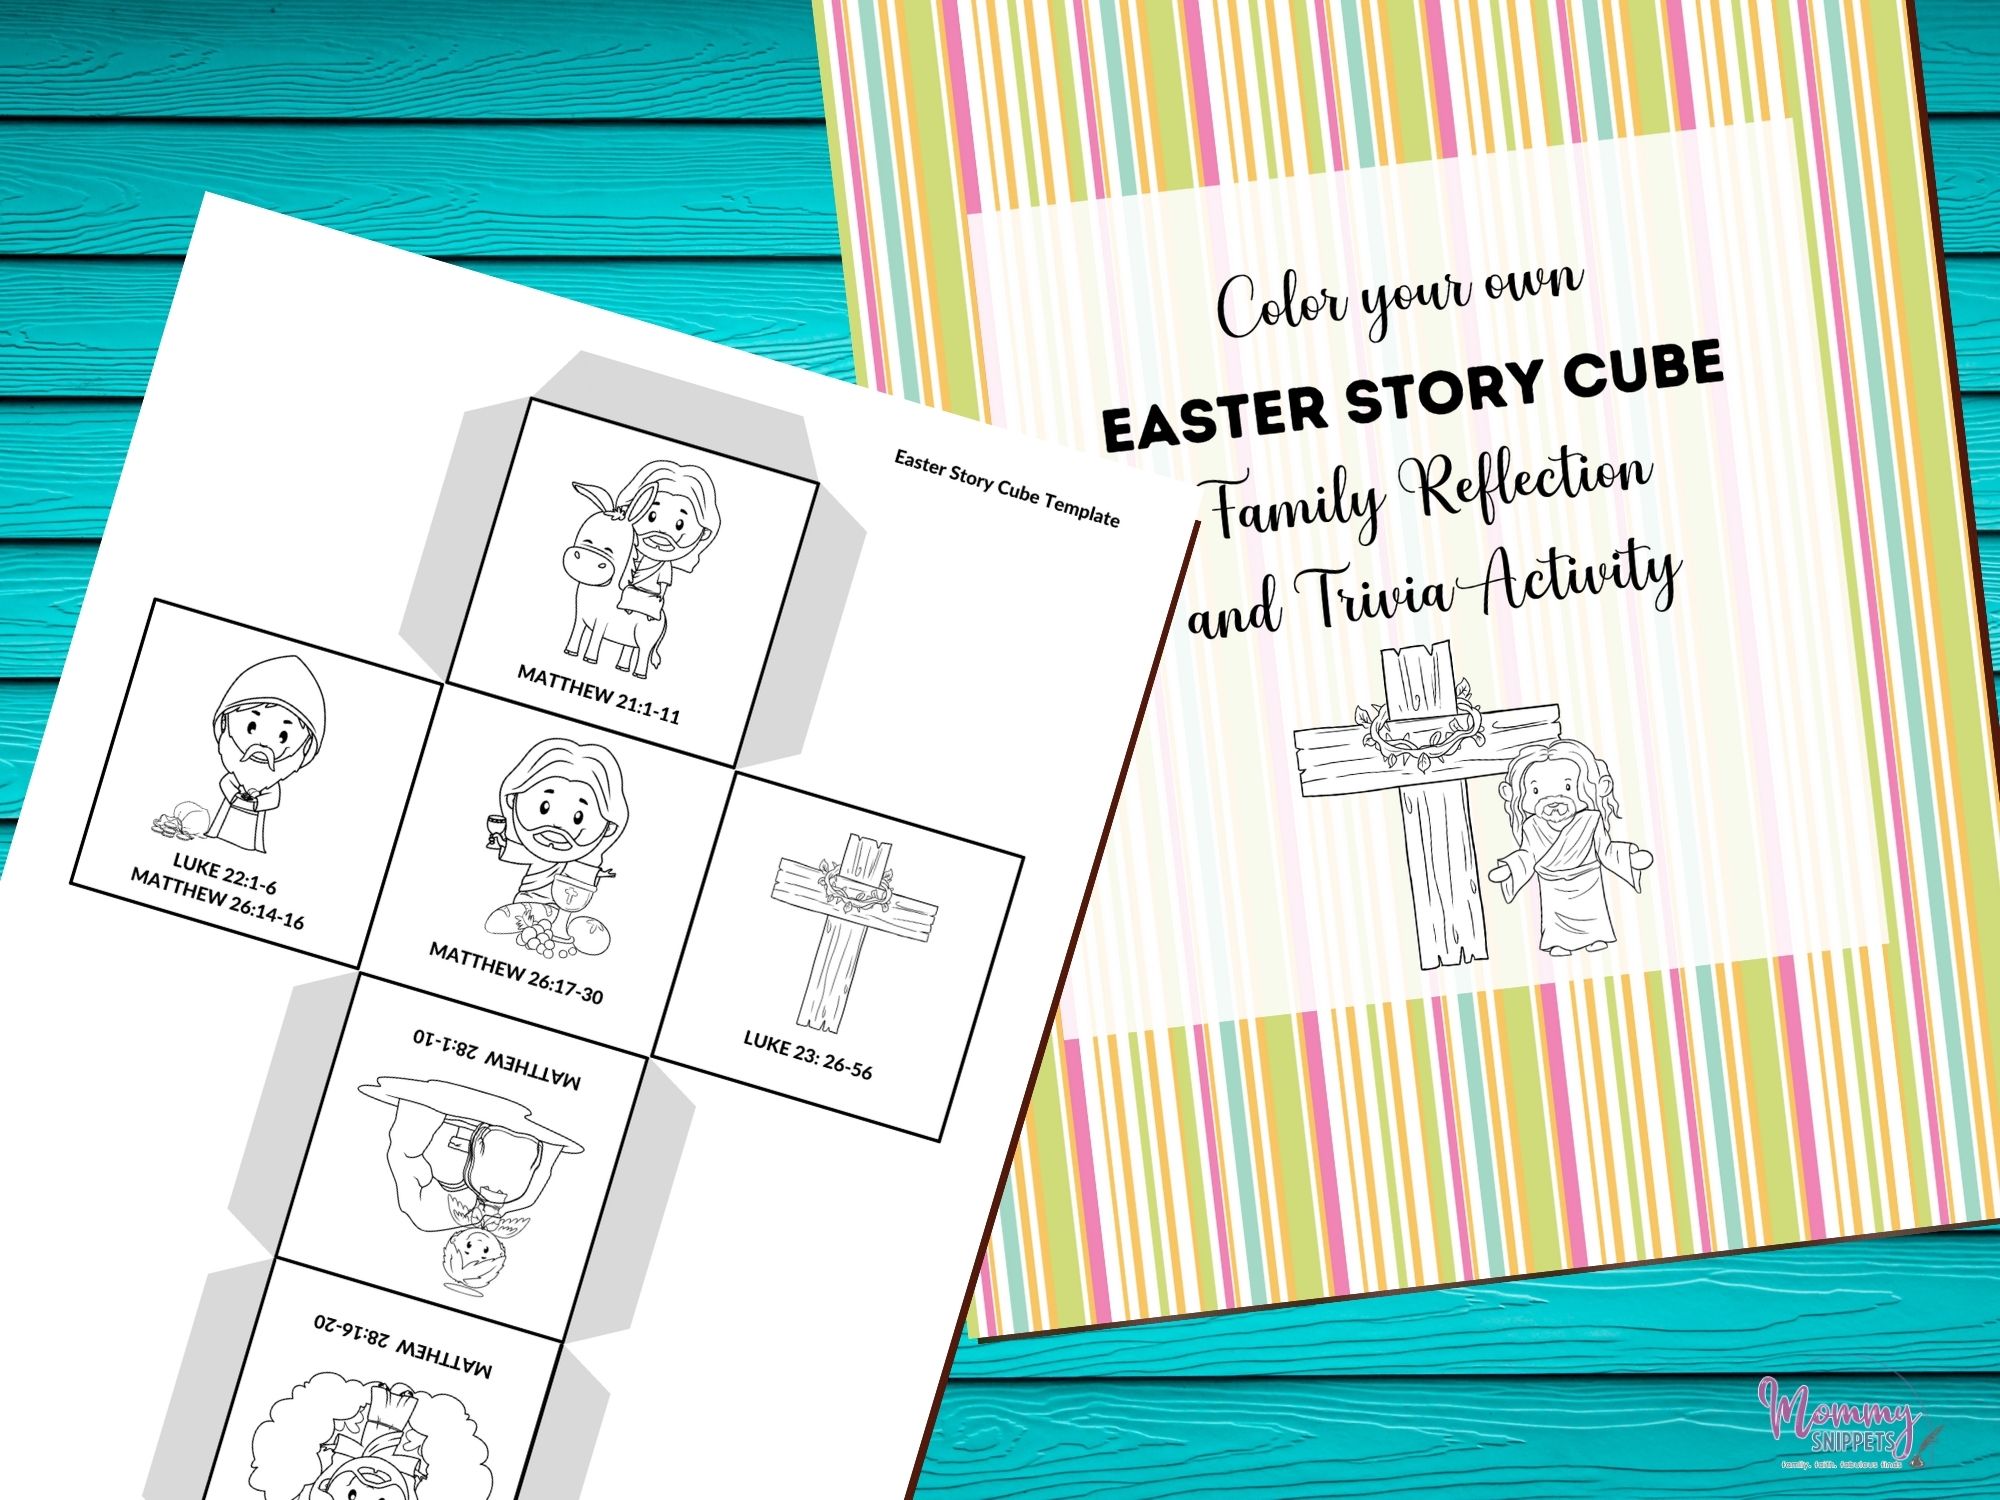 The best easter story for kids story cube activity